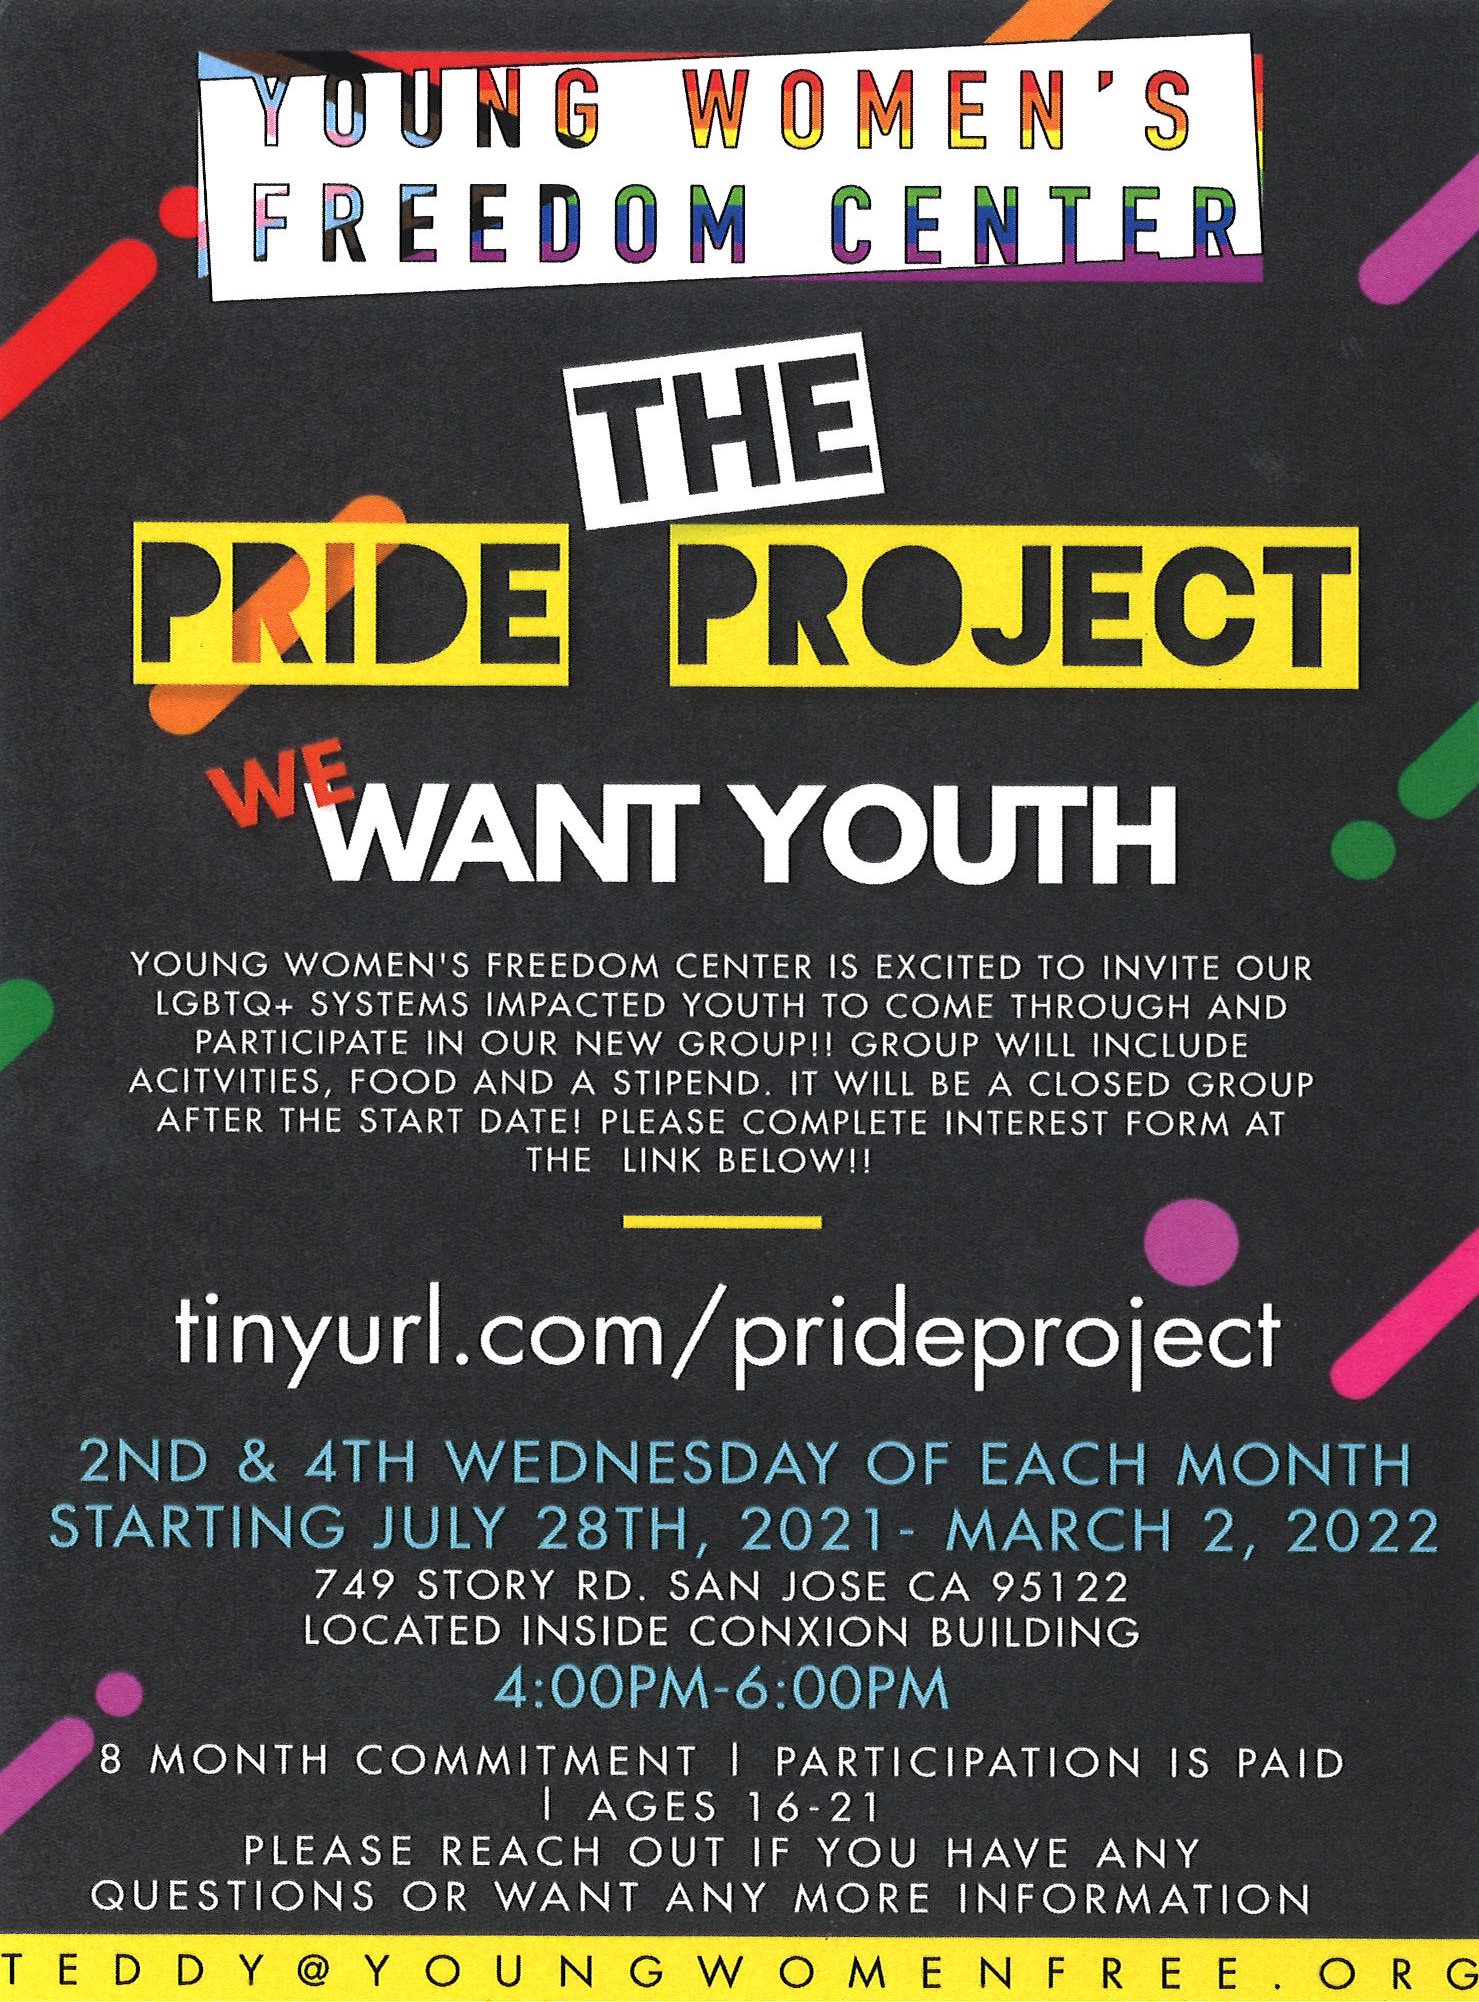 The Pride Project.jpg